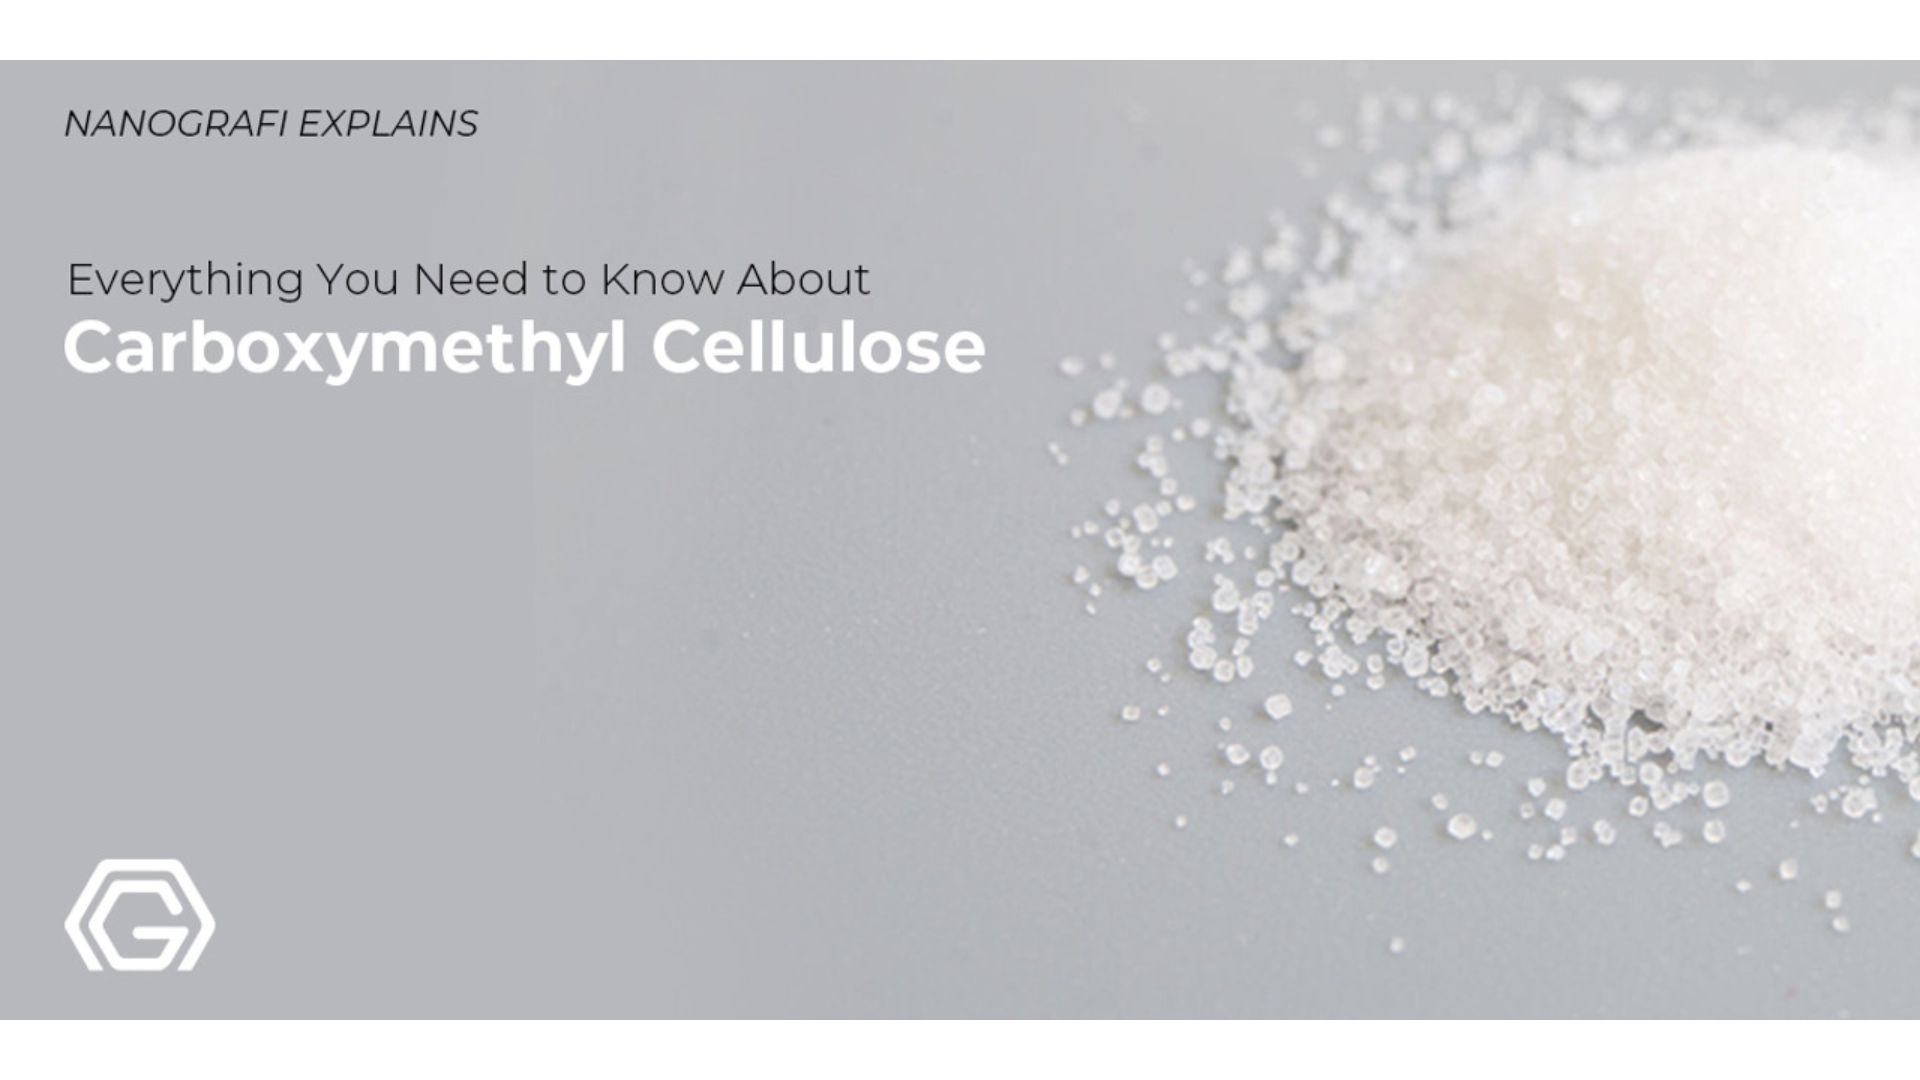 Everything you need to know about carboxymethyl cellulose